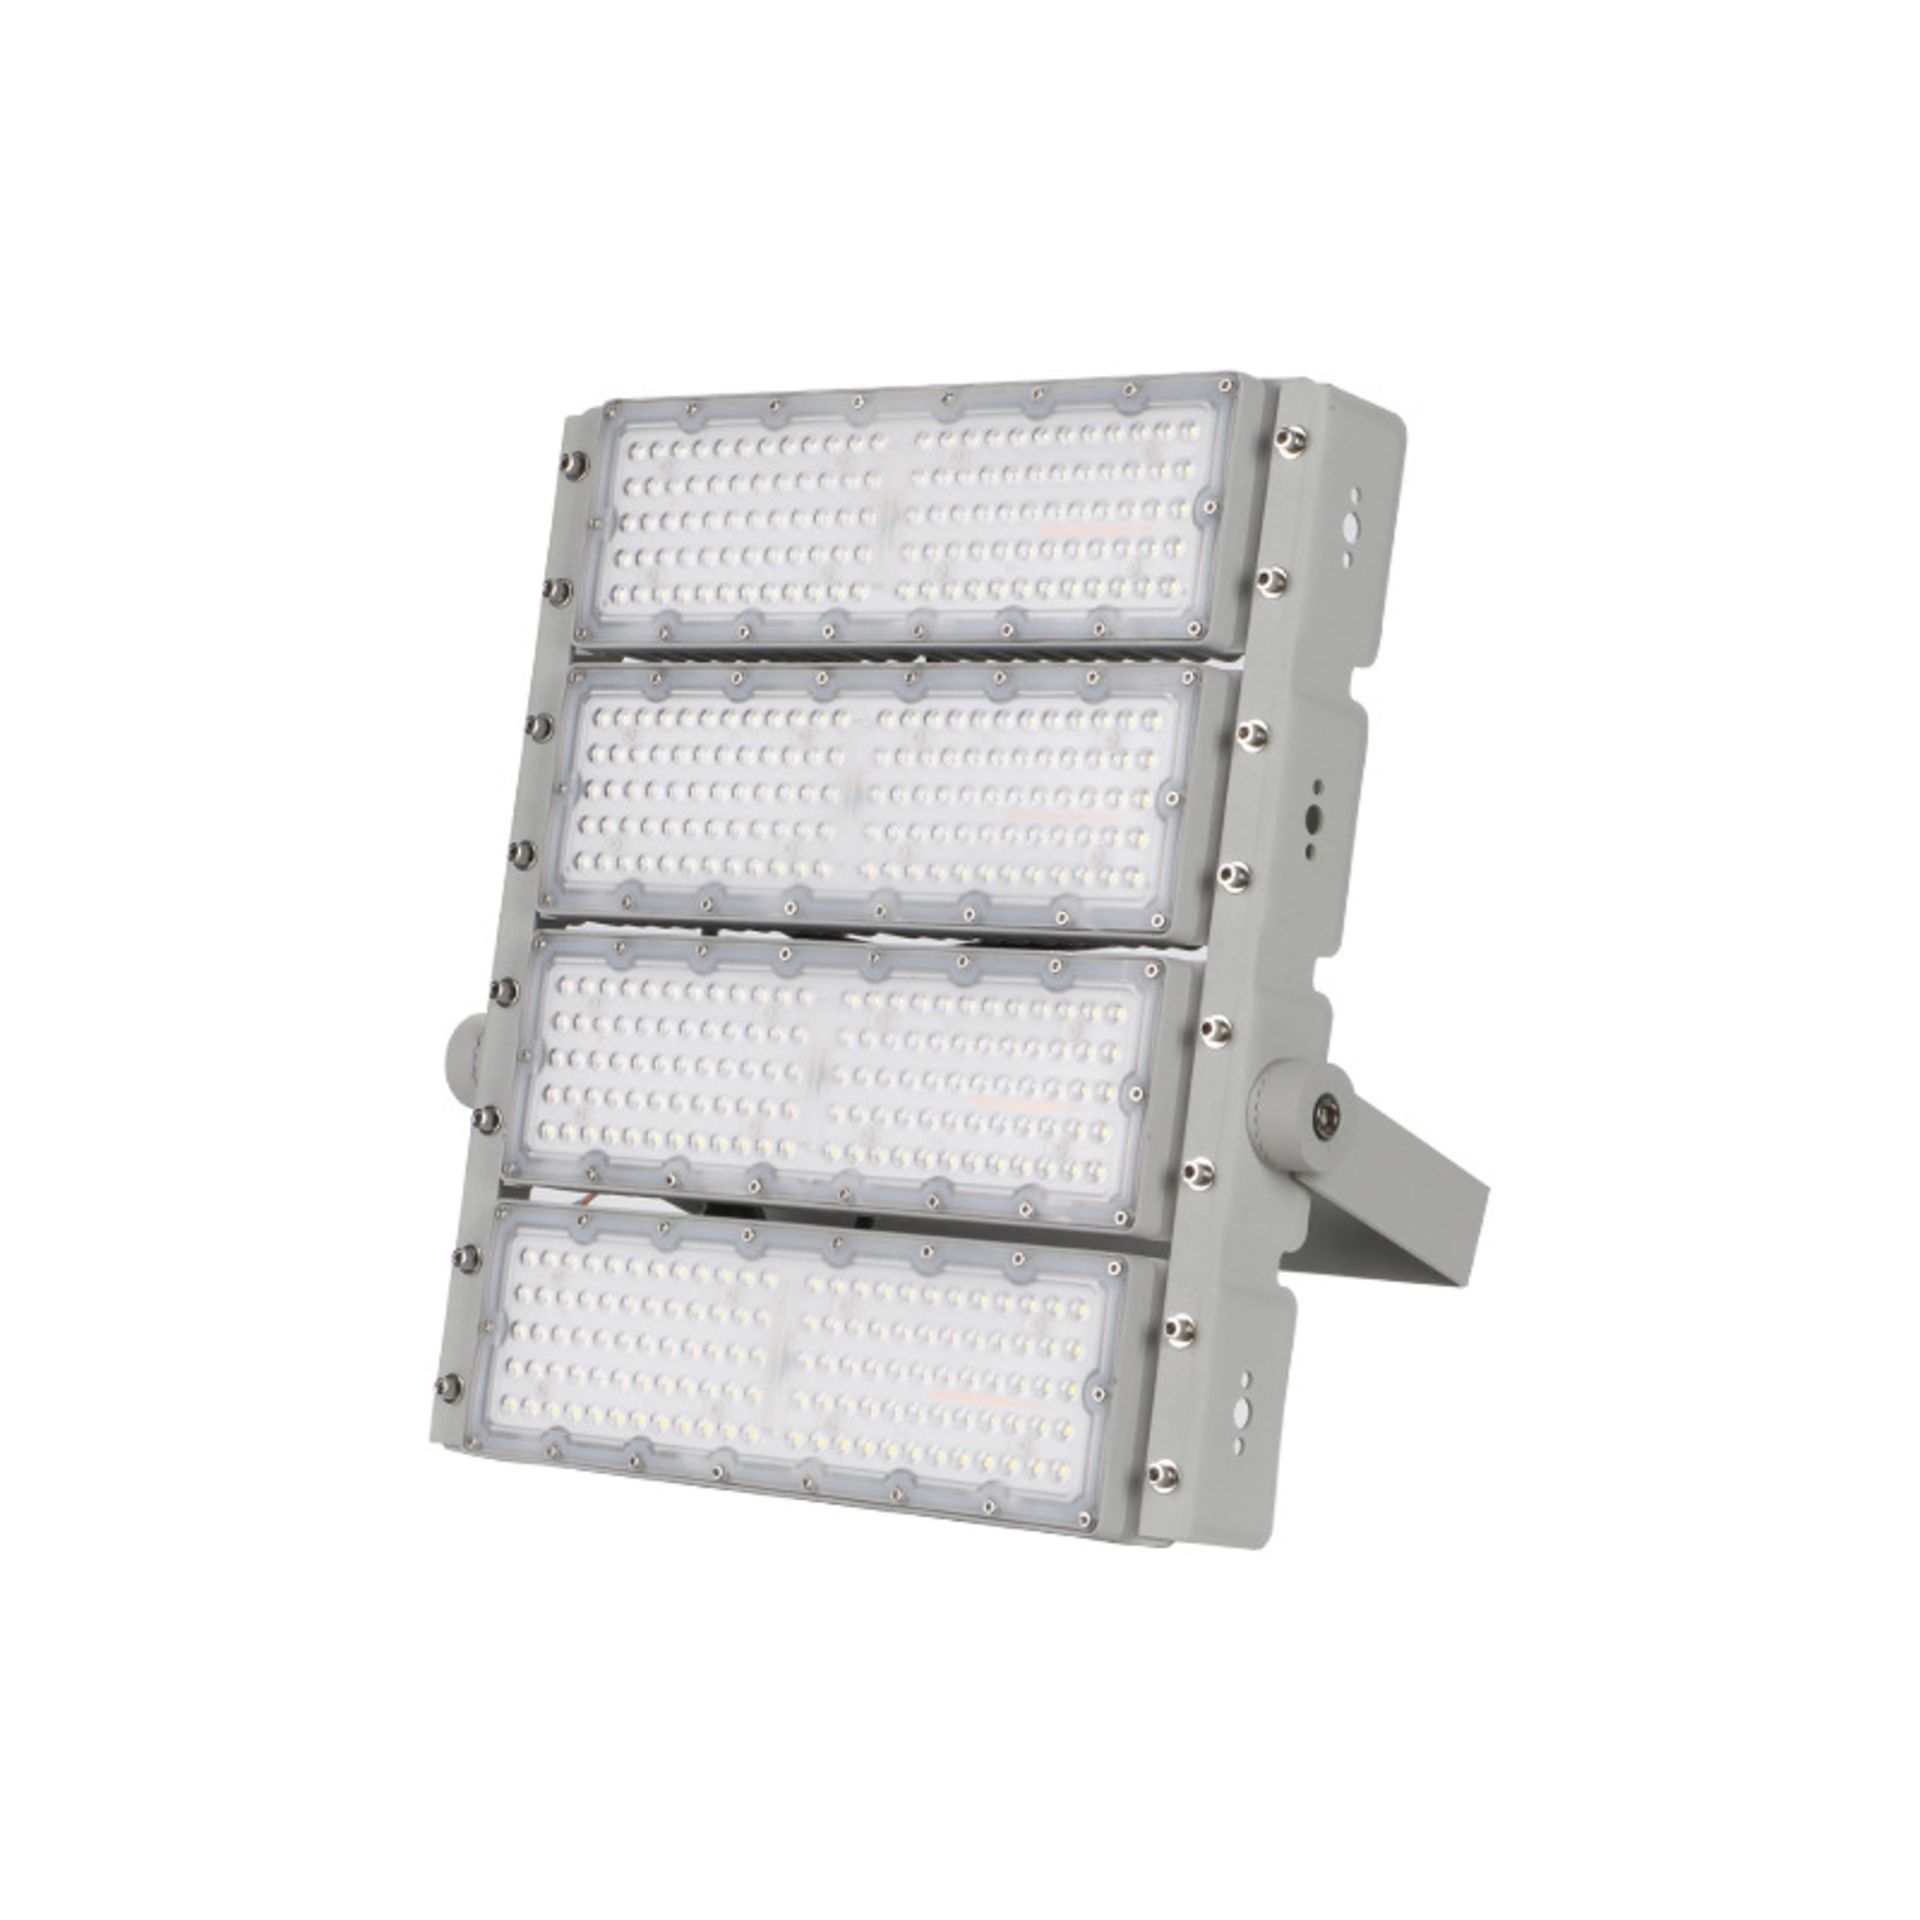 3 x LED400 Watt Flood Light Panel - For Car Parks, Security, Playing fields, Football pitches etc - Image 2 of 8